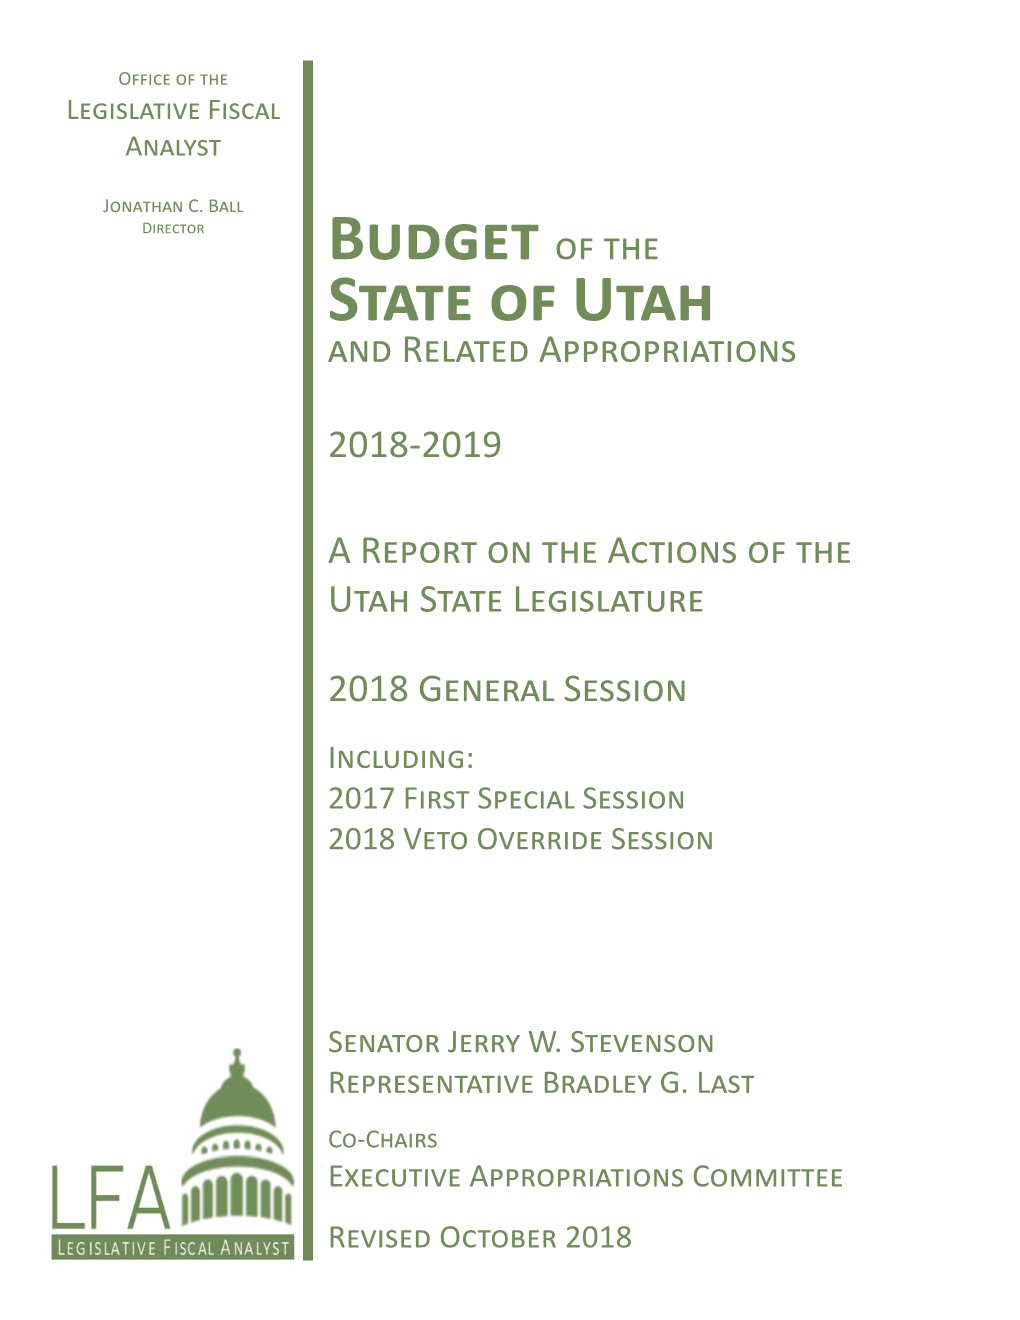 Budget of the State of Utah 2018-2019